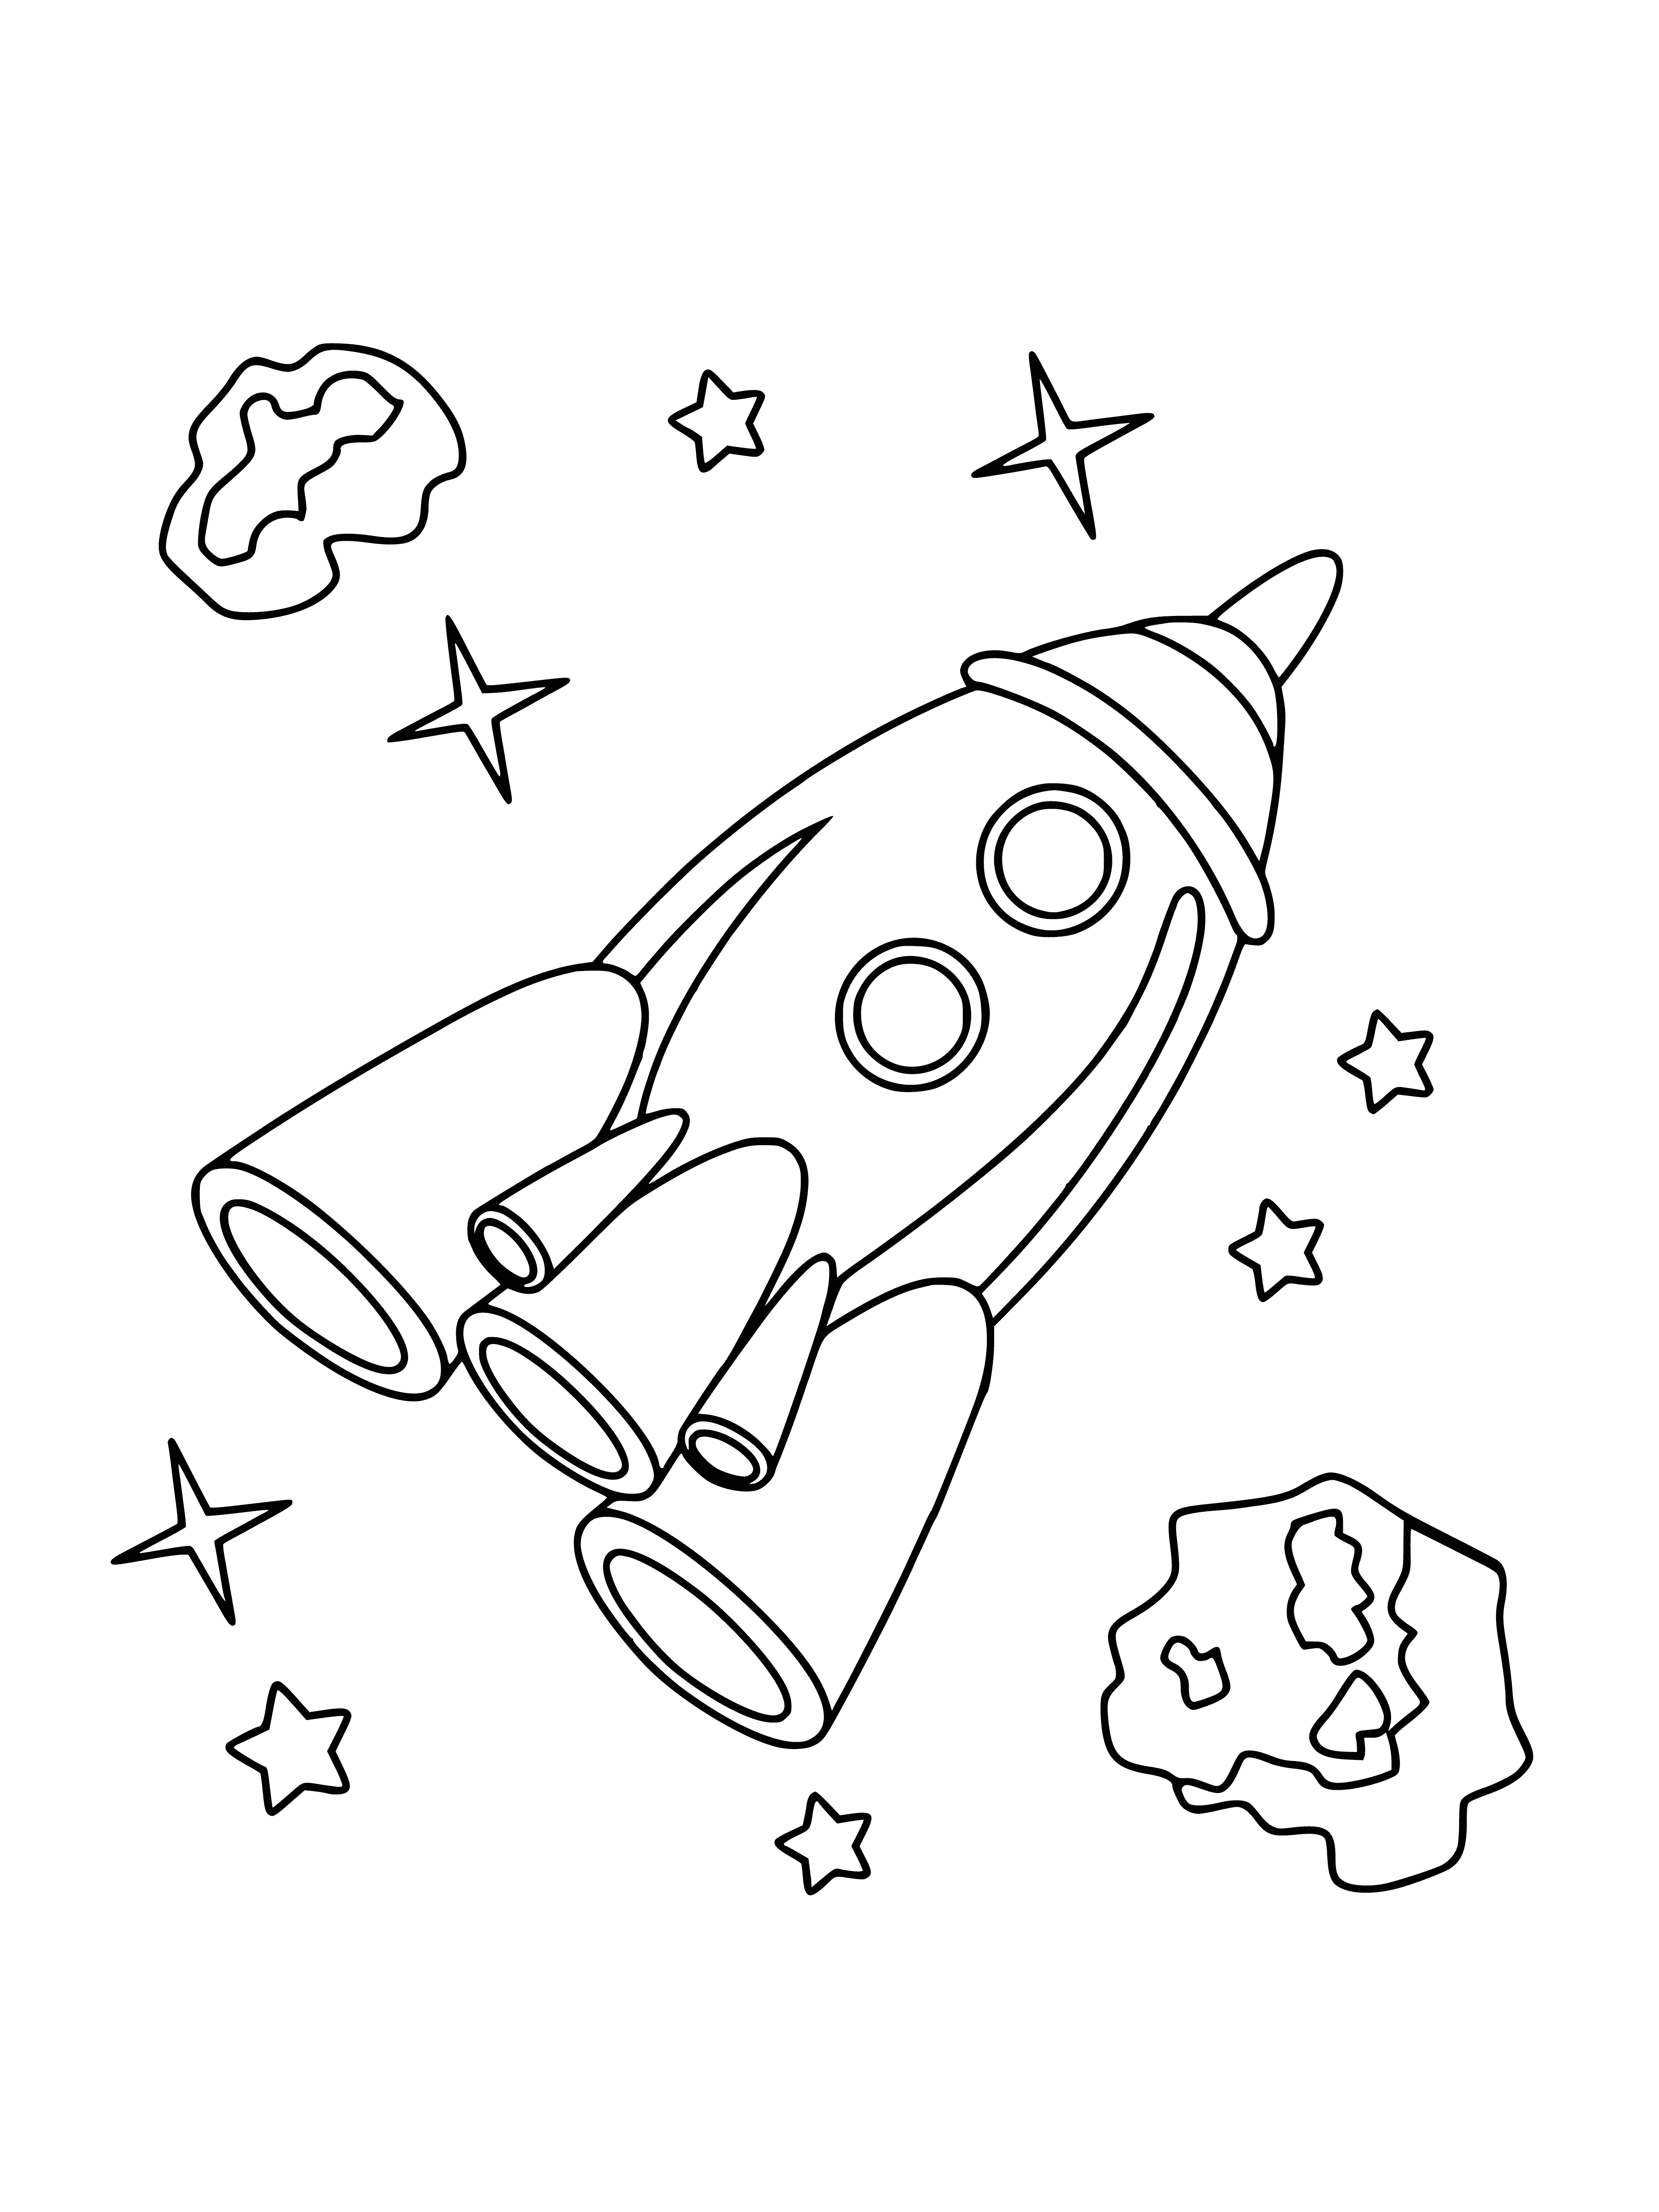 coloring page: -> Rocket in center of page w/ orange & black colors, nozzle & fins at top/bottom, blue bg.